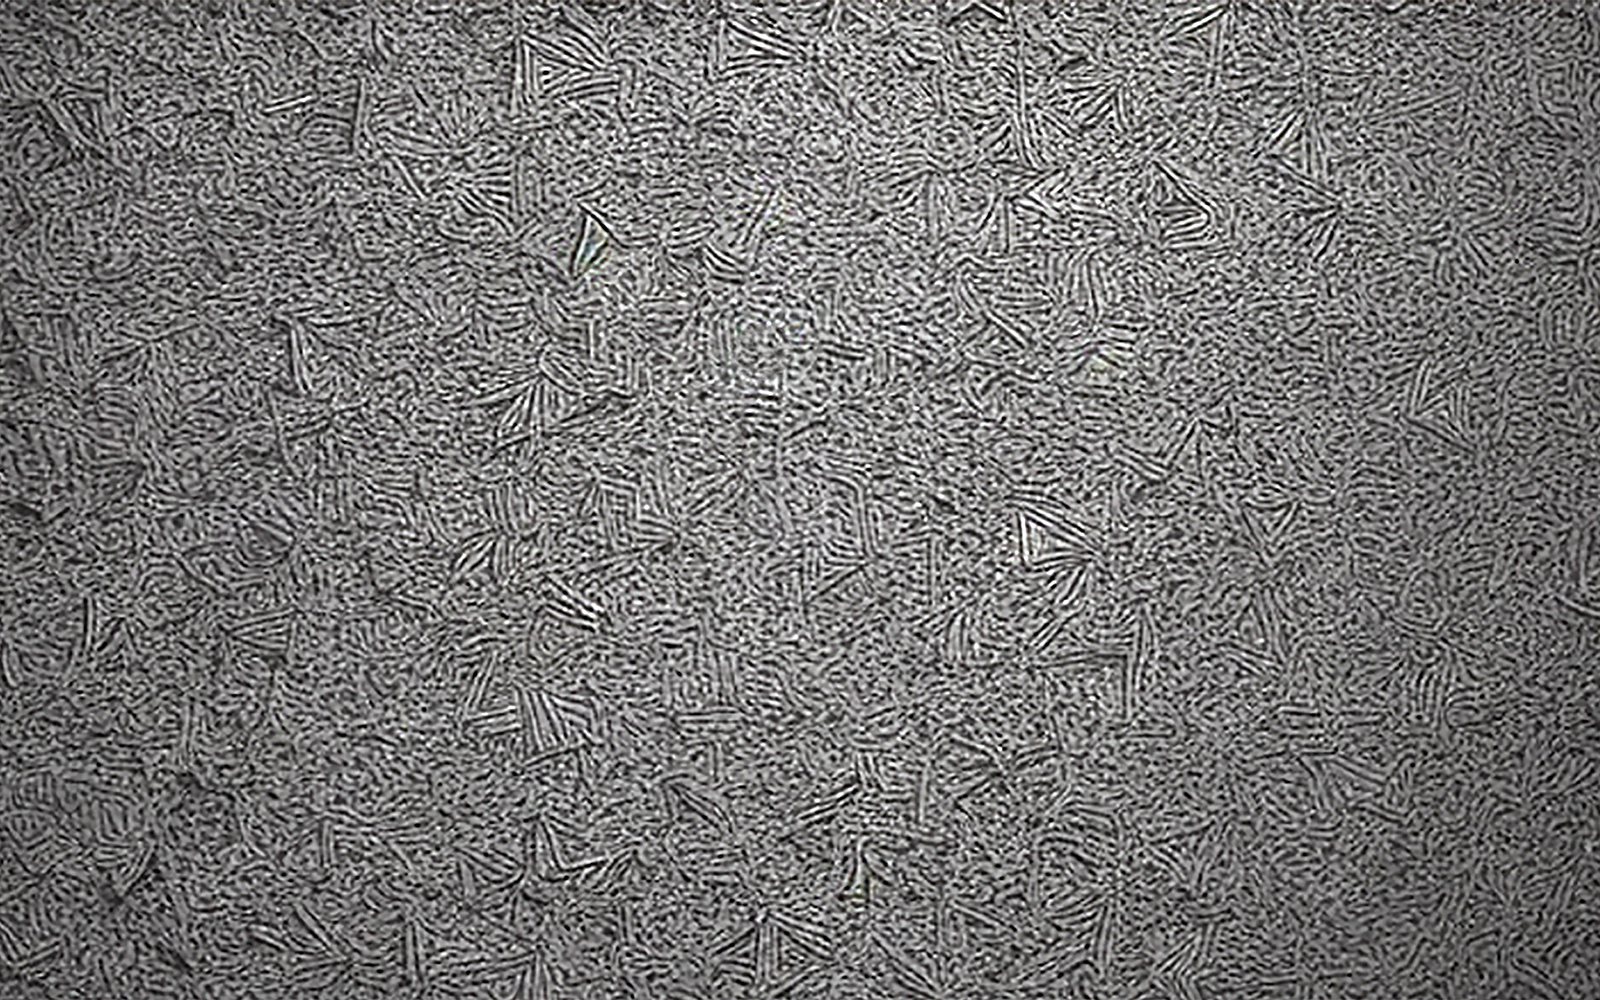 Textured leather background_textured wall background_textured wall pattern background